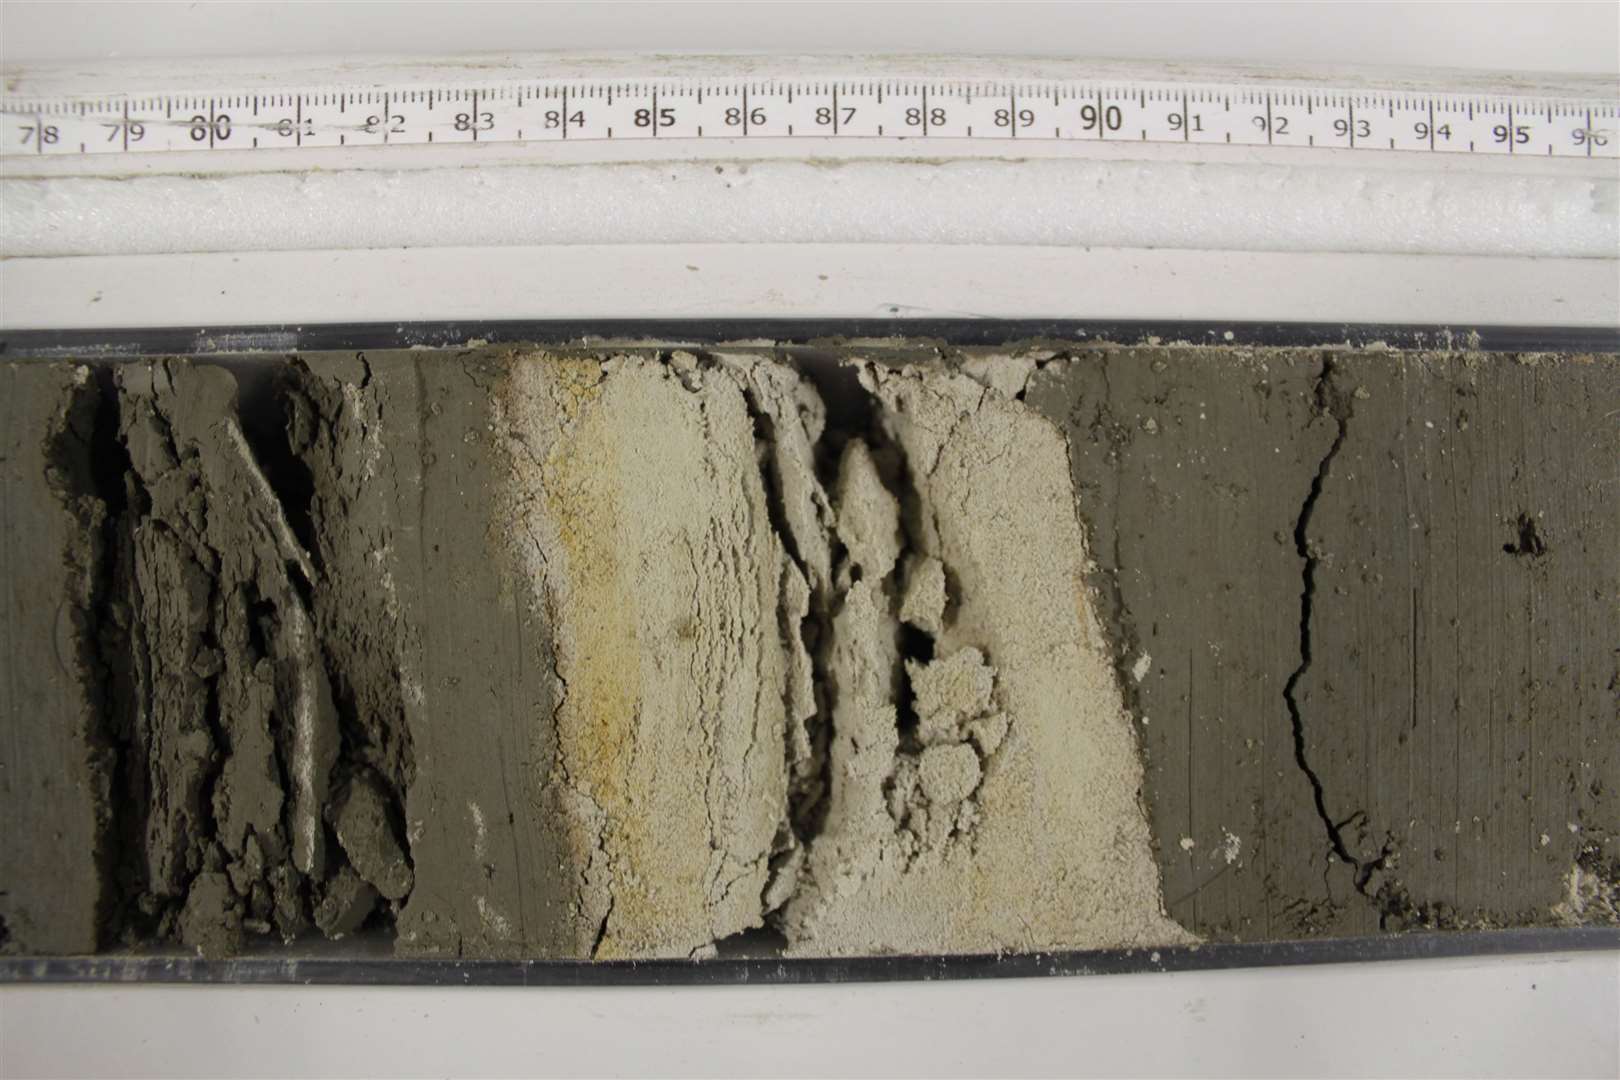 Volcanic ash layers from the Bering Sea (Dr Tom Gernon/University of Southampton/PA)